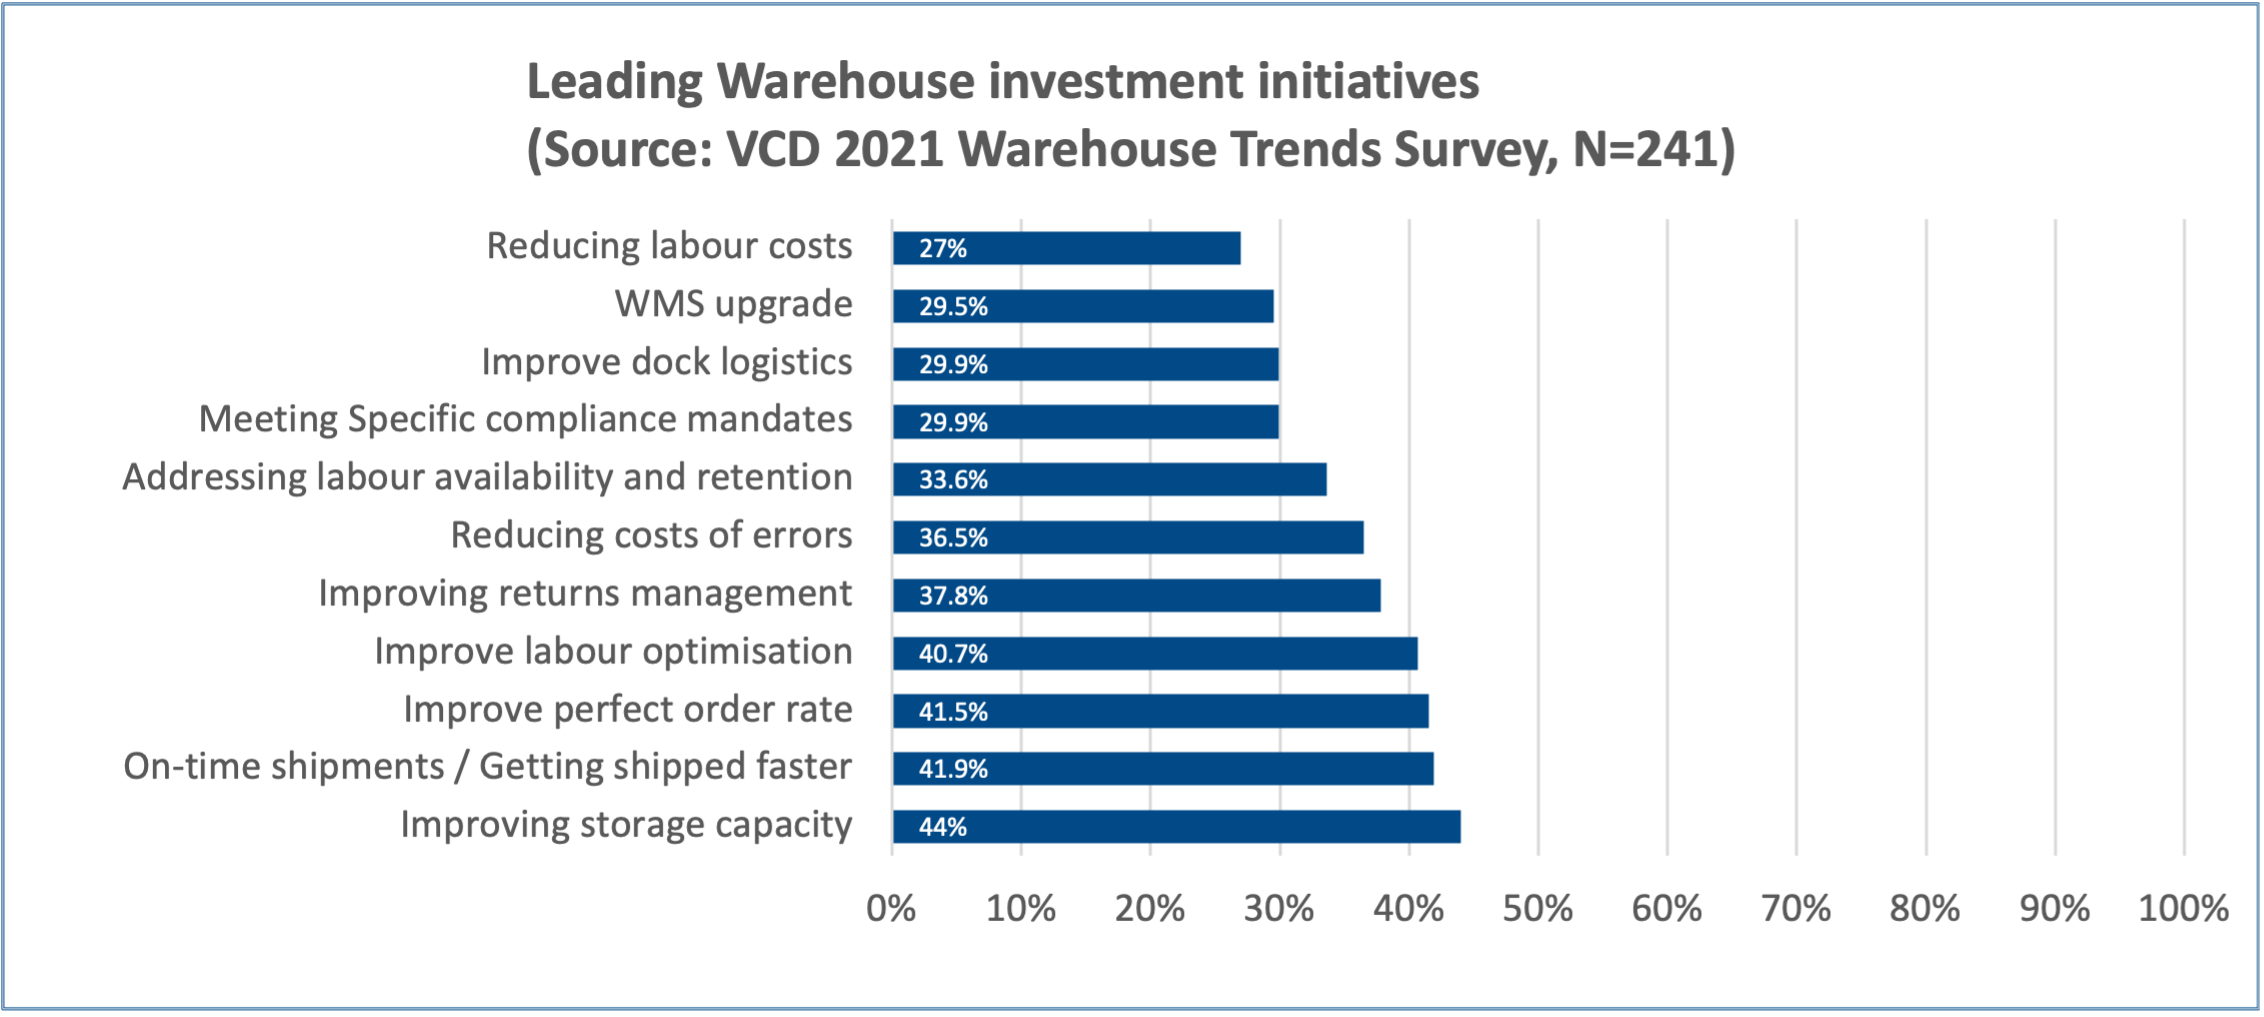 Graph showing the leading warehouse investment initiatives